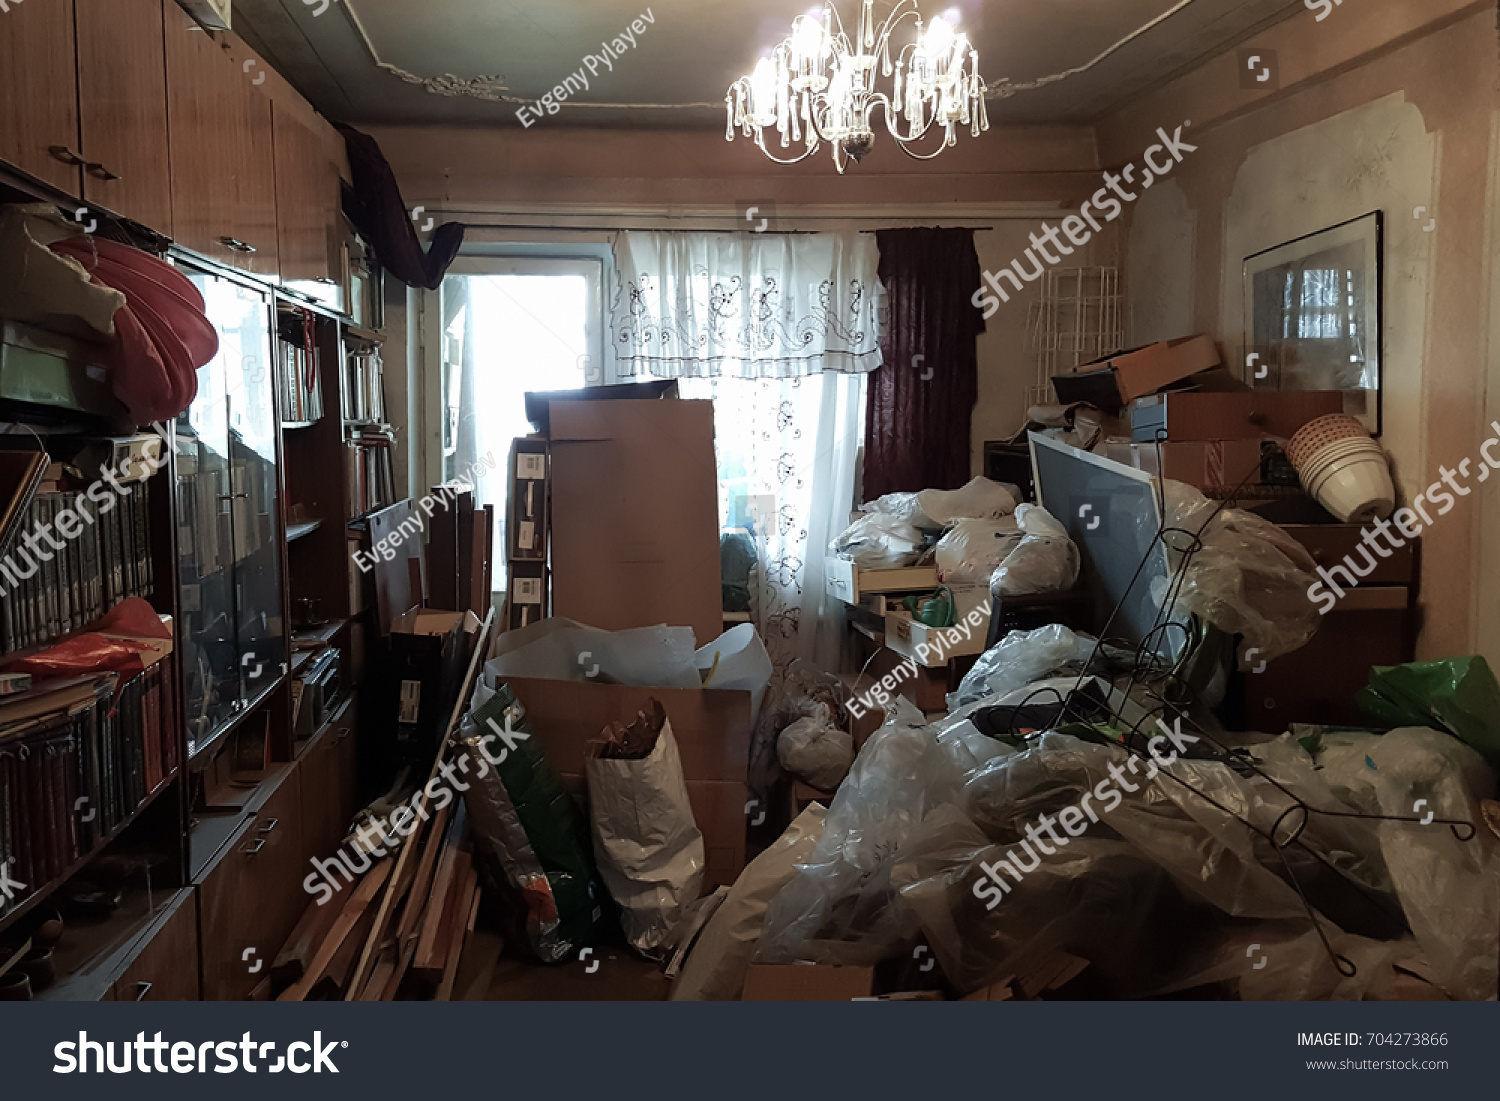 Apartment of a pensioner who suffers from compulsive hoarding, littered with trash and books #704273866